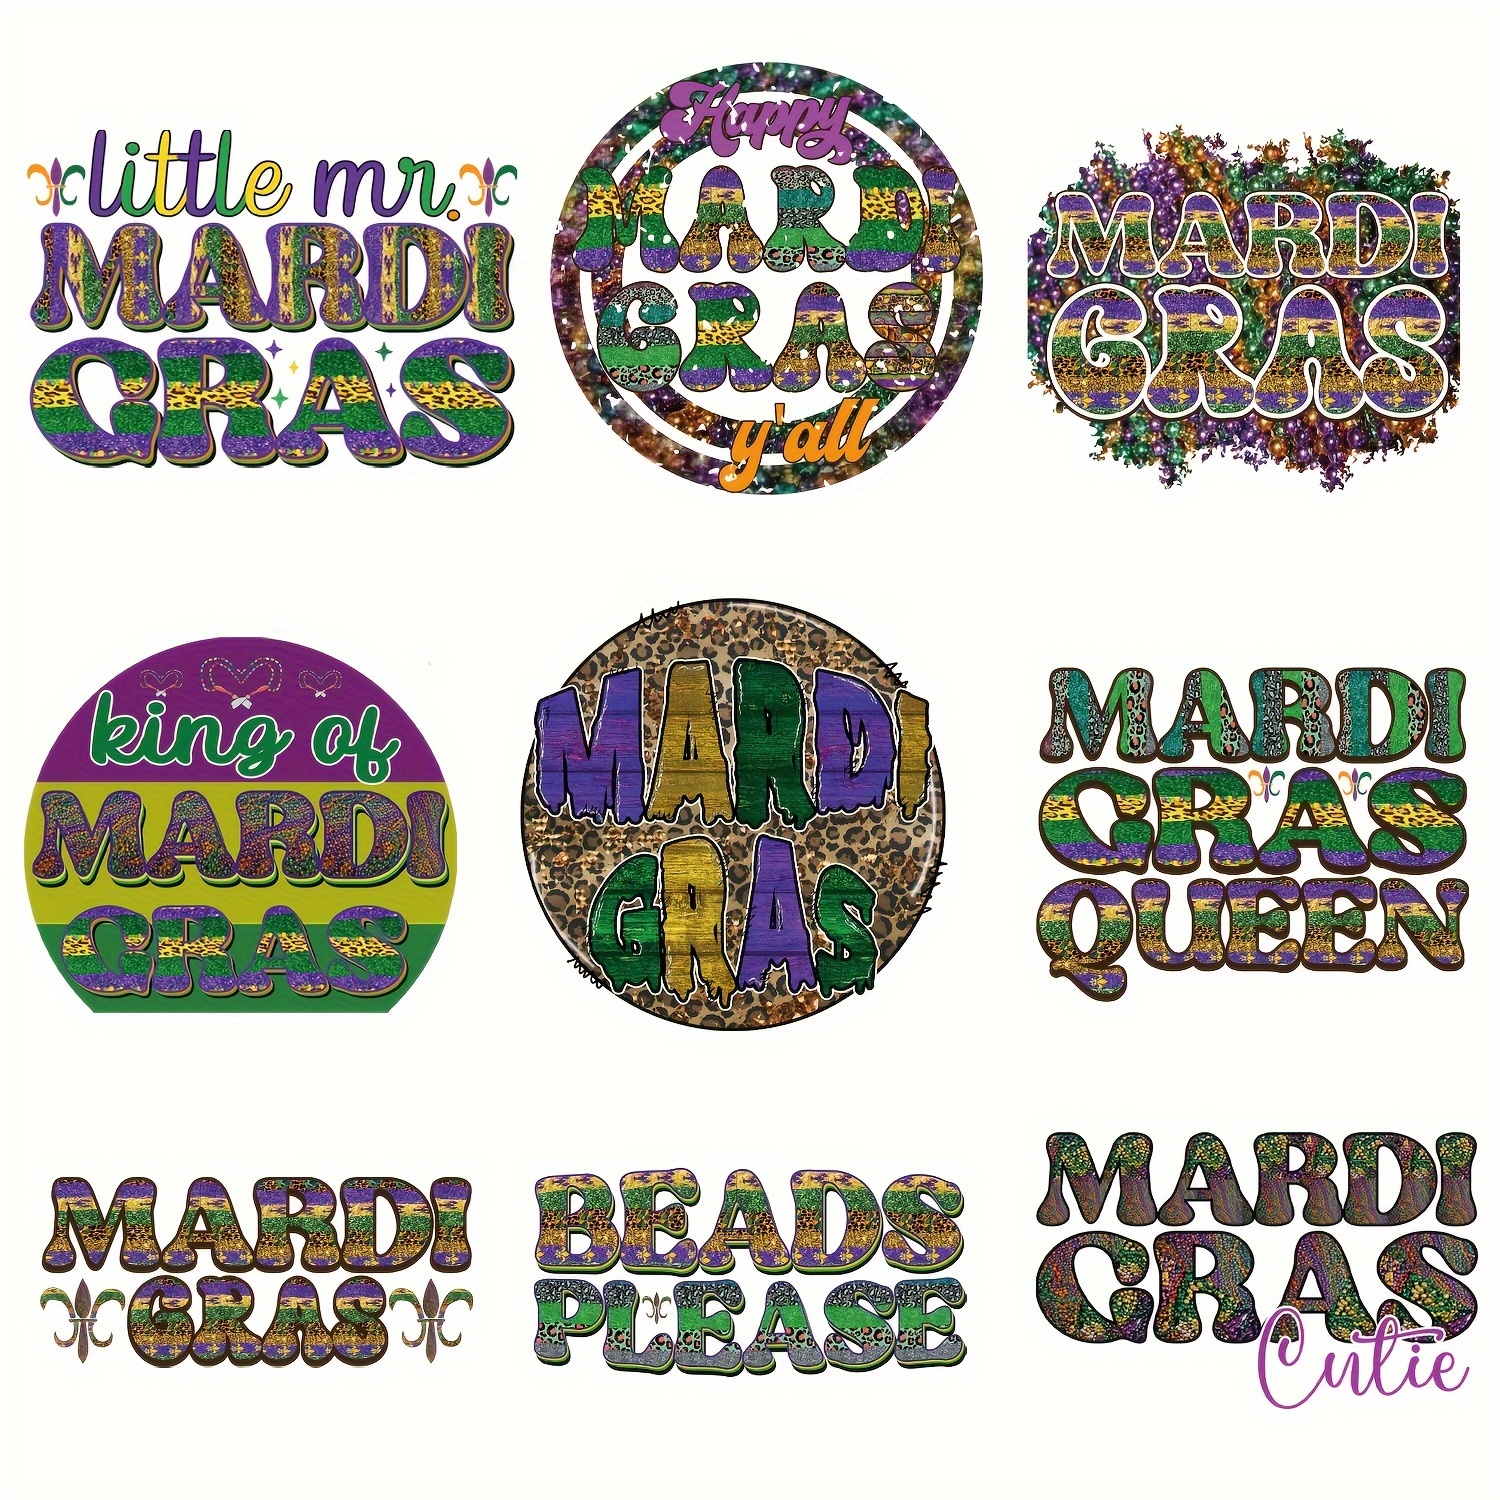 Mardi Gras Carnival Iron-On Transfer For Clothing Patches Mardi